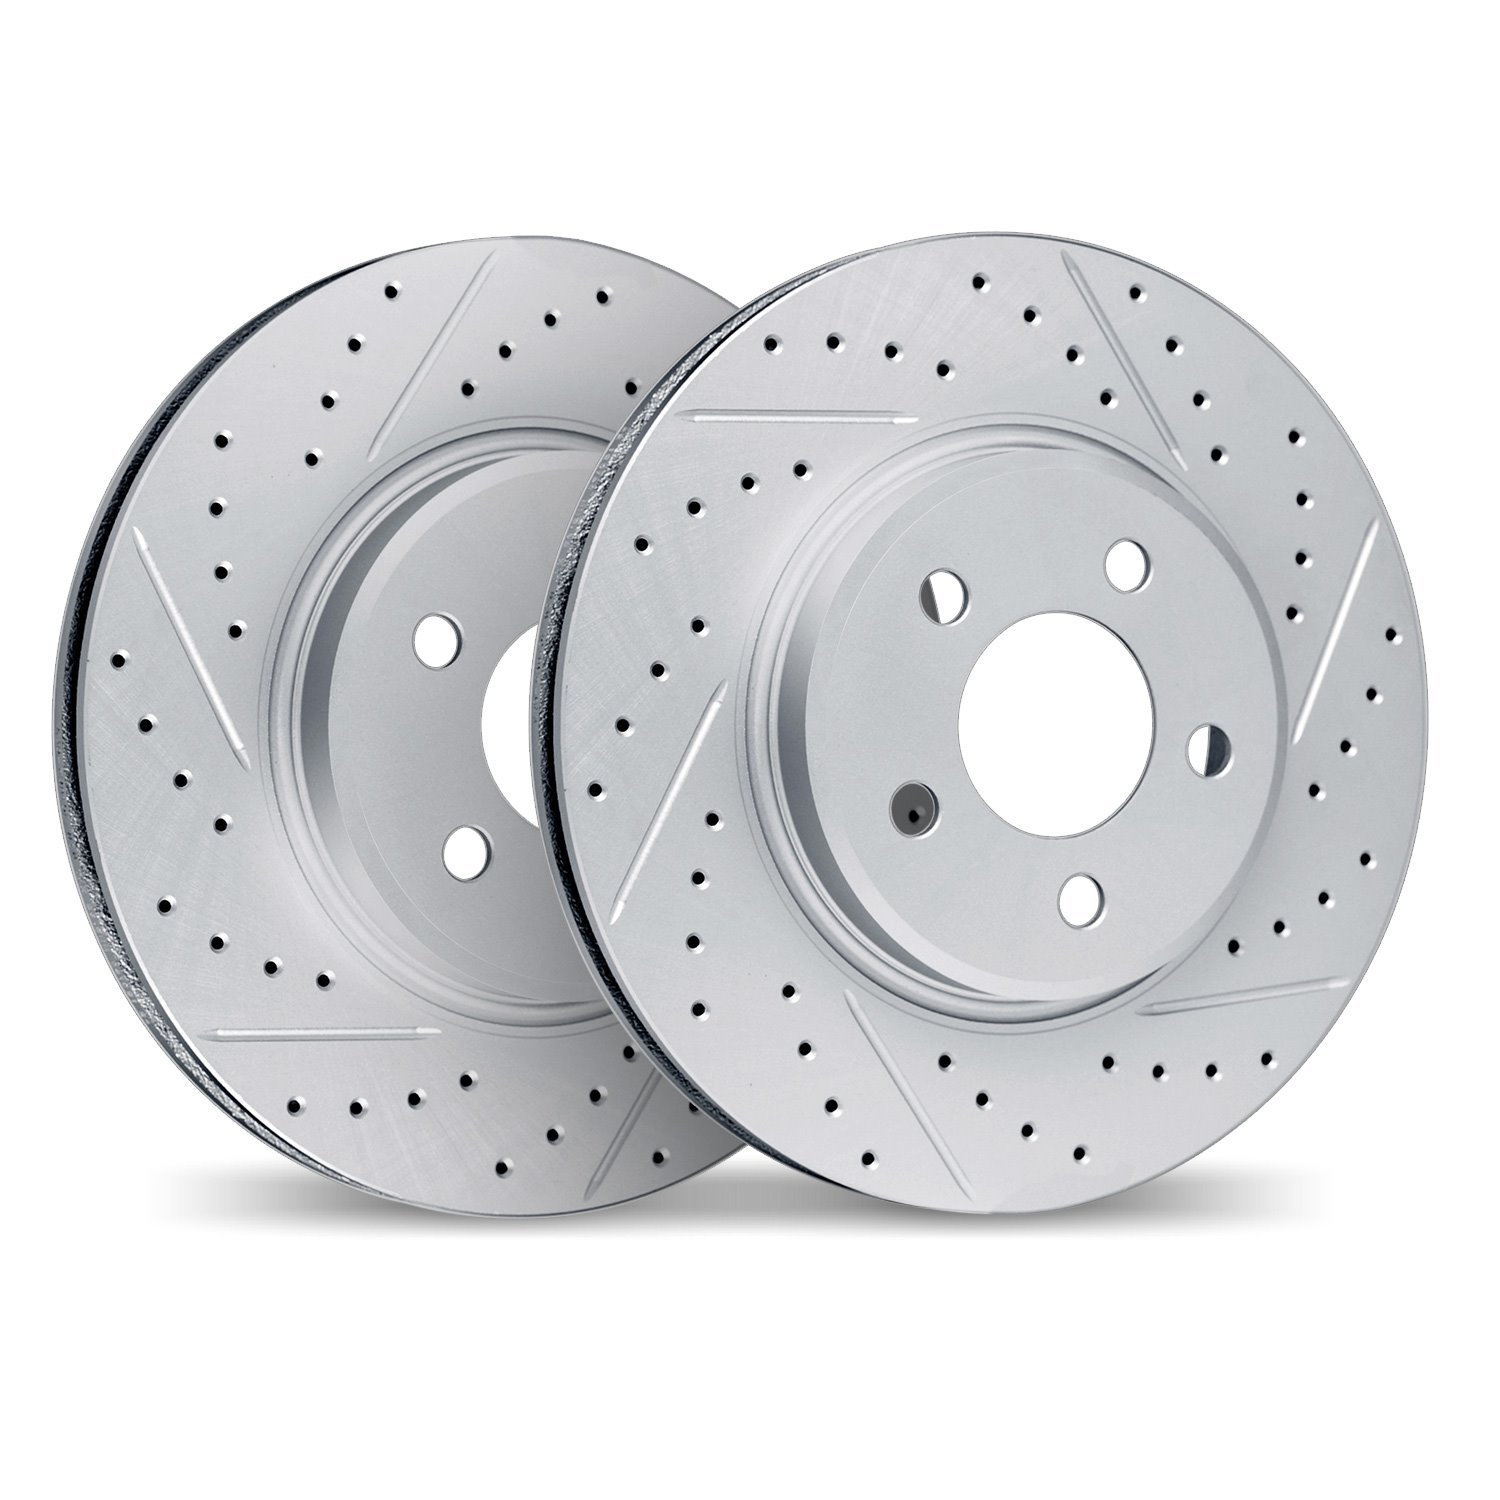 2002-67040 Geoperformance Drilled/Slotted Brake Rotors, Fits Select Infiniti/Nissan, Position: Front